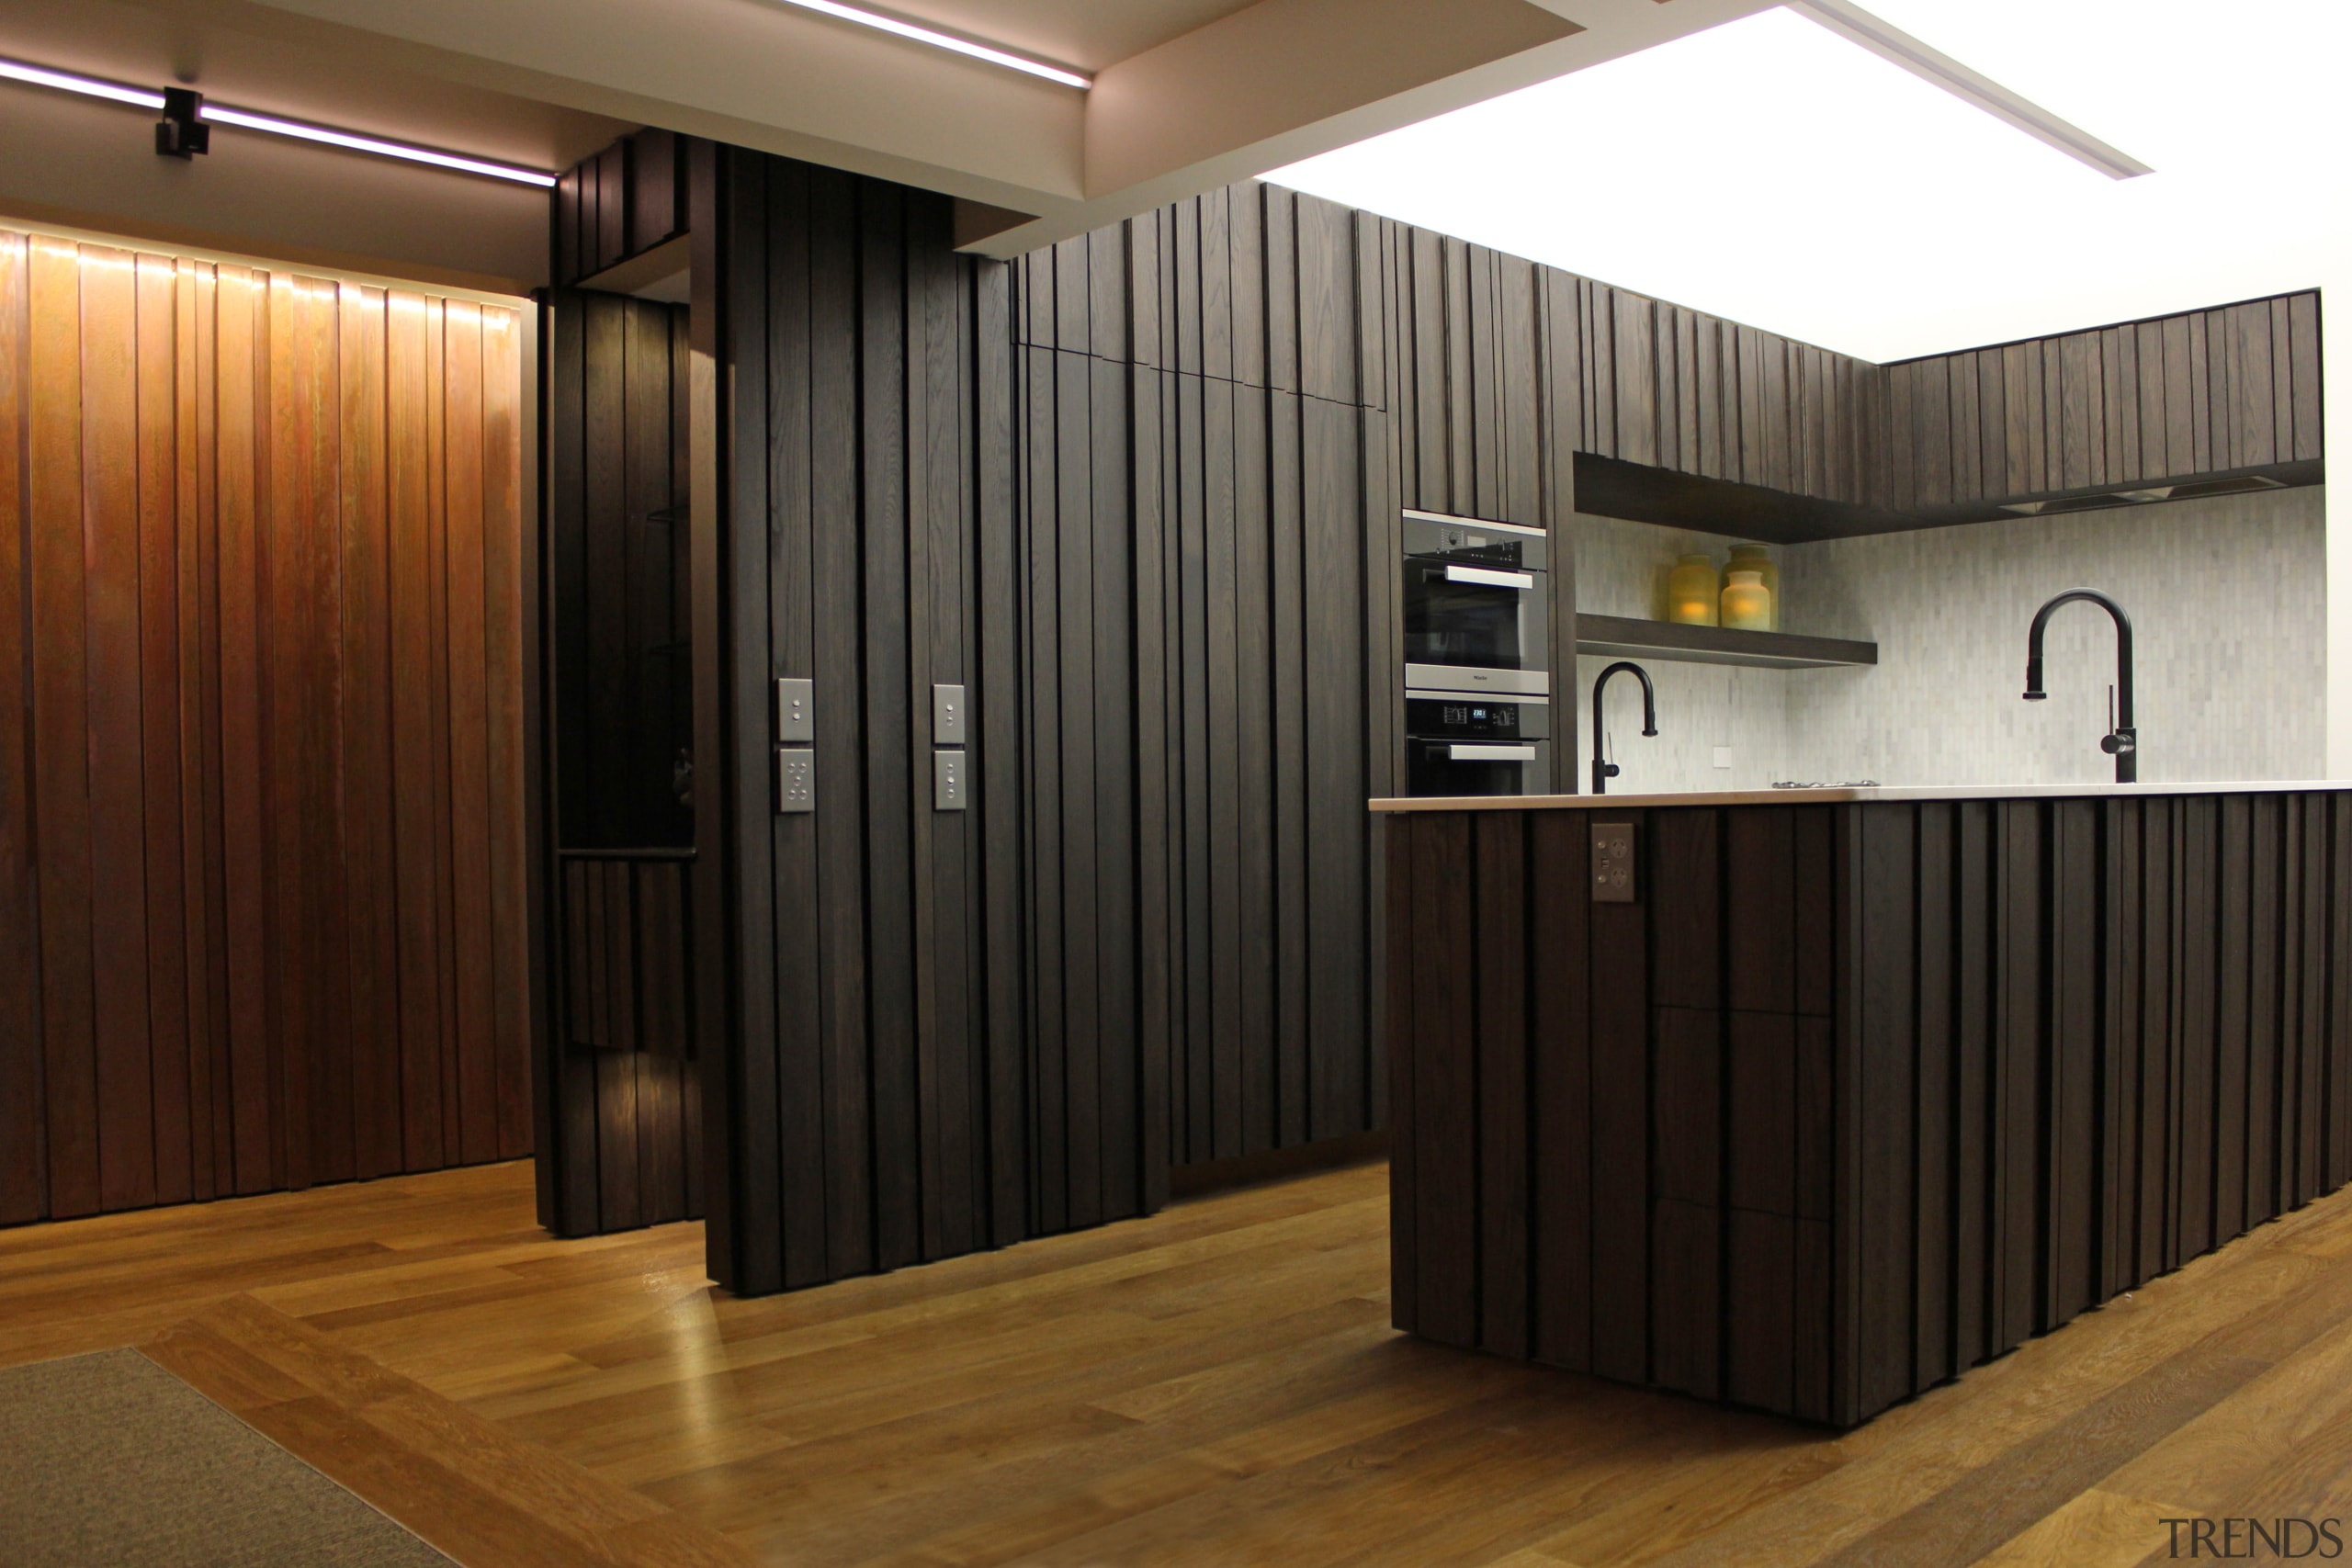 Dark-stained American oak cabinets with a custom profile floor, flooring, interior design, lobby, wood, black, brown